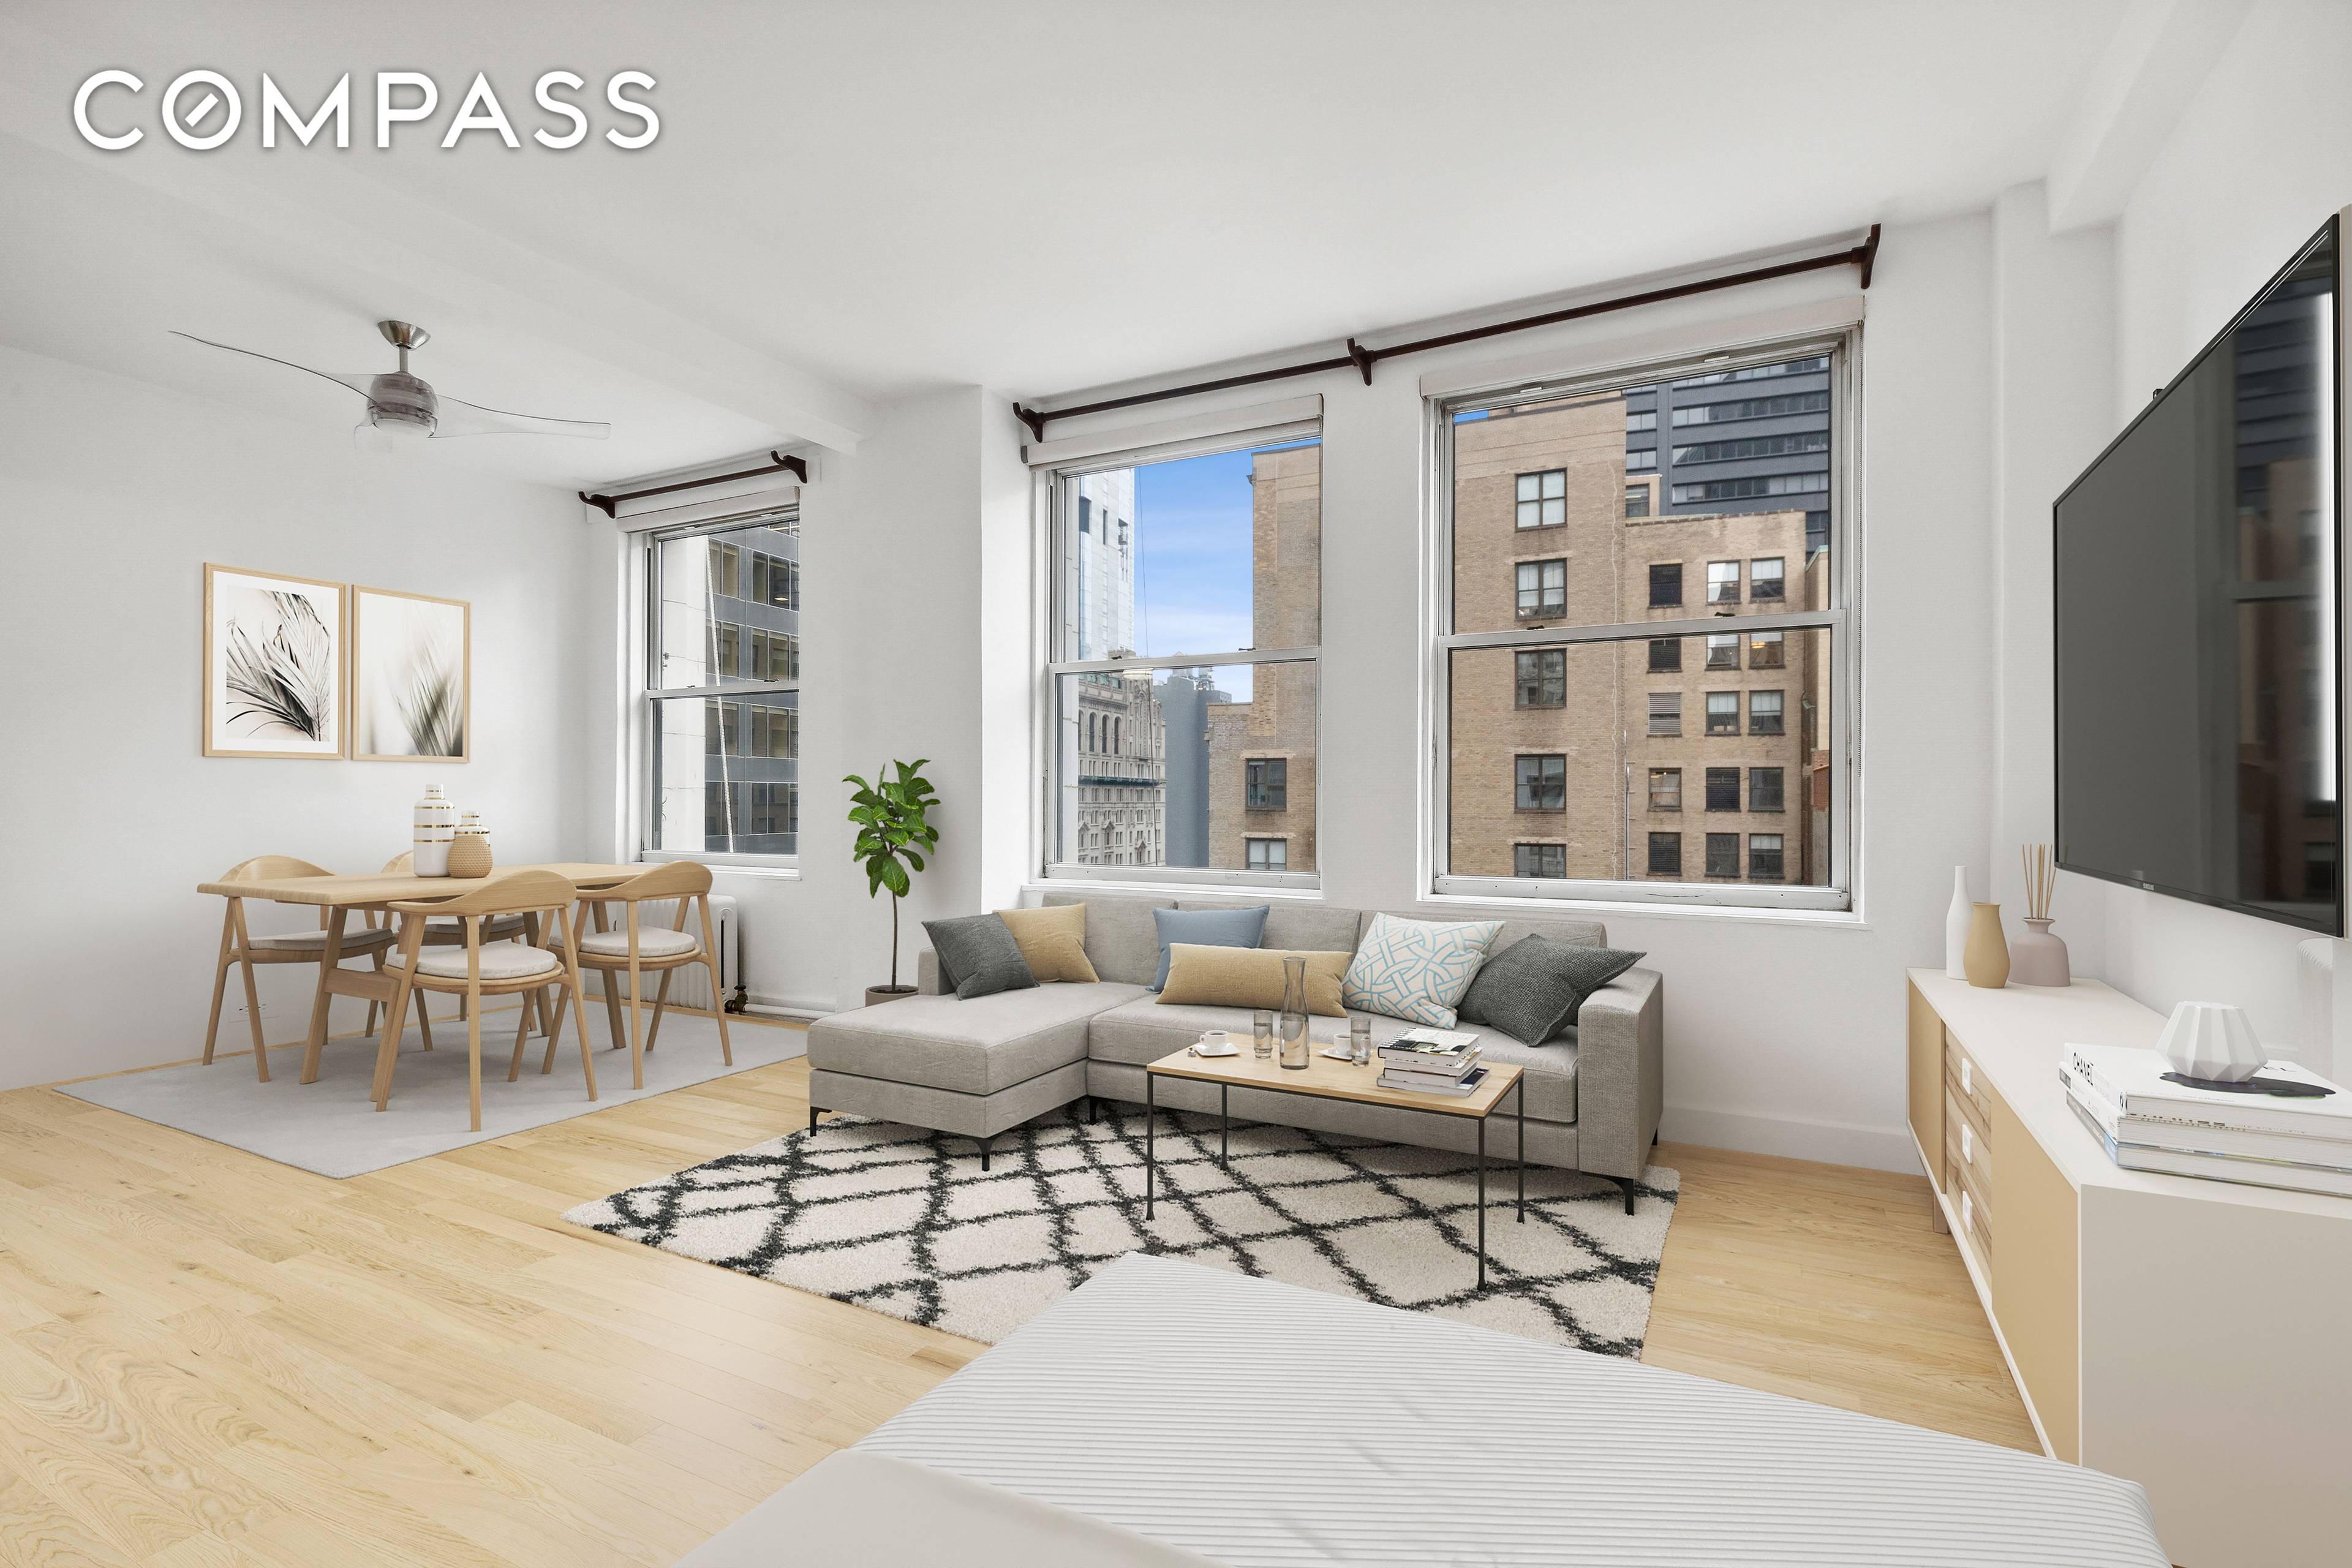 Set on a high floor in one of Downtown Manhattan's most distinctive Pre War properties, this loft like apartment is filled with fantastic light and features city views and open ...